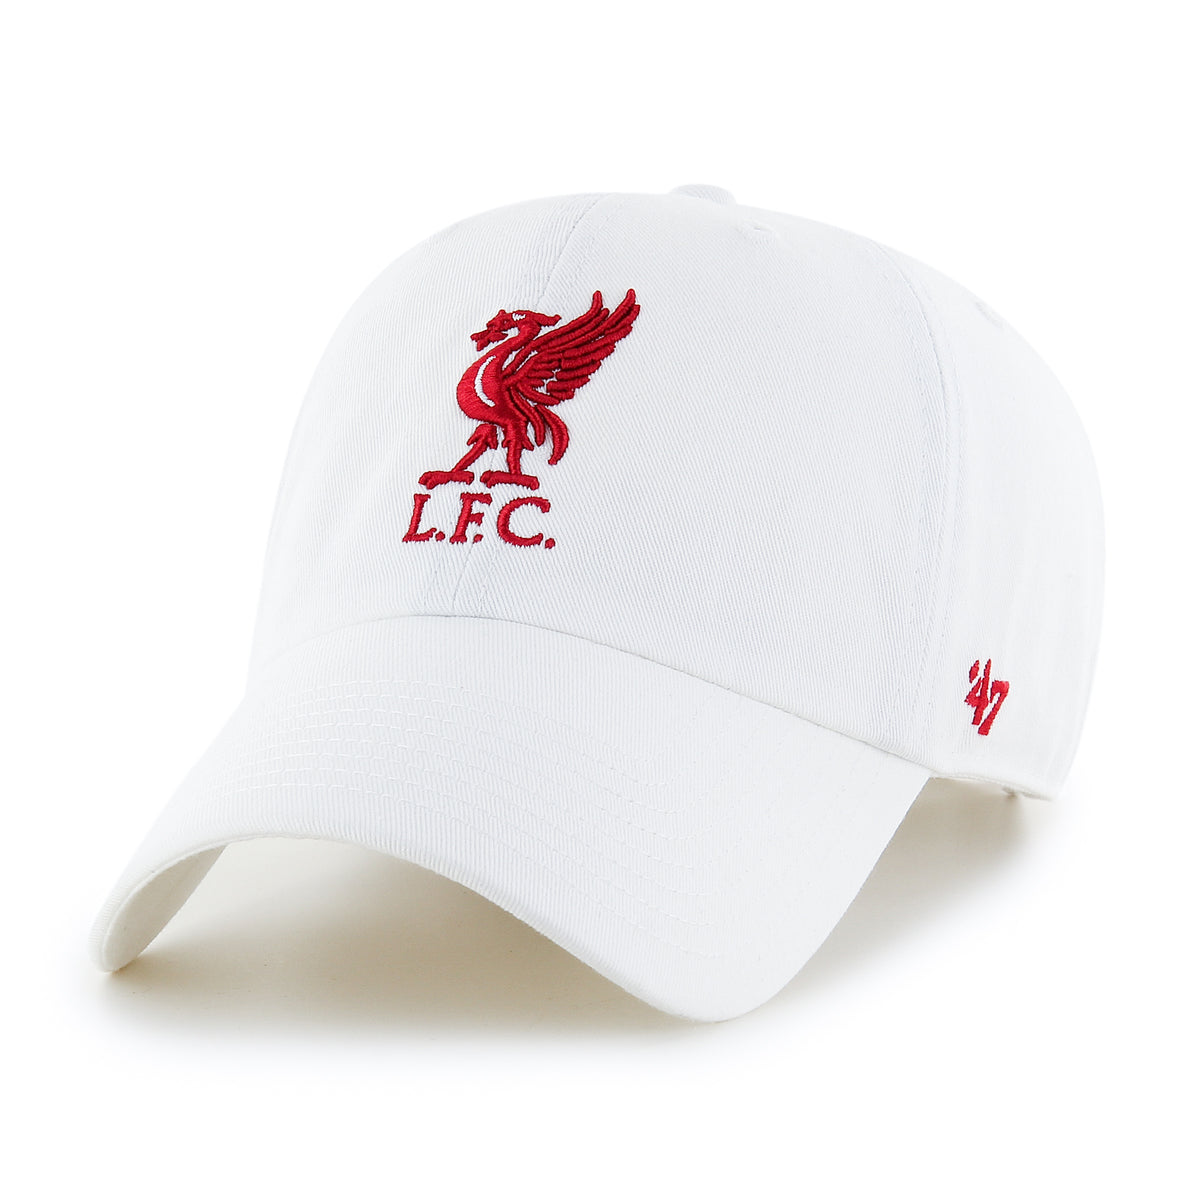 EPL - LIVERPOOL FC '47 CLEAN UP